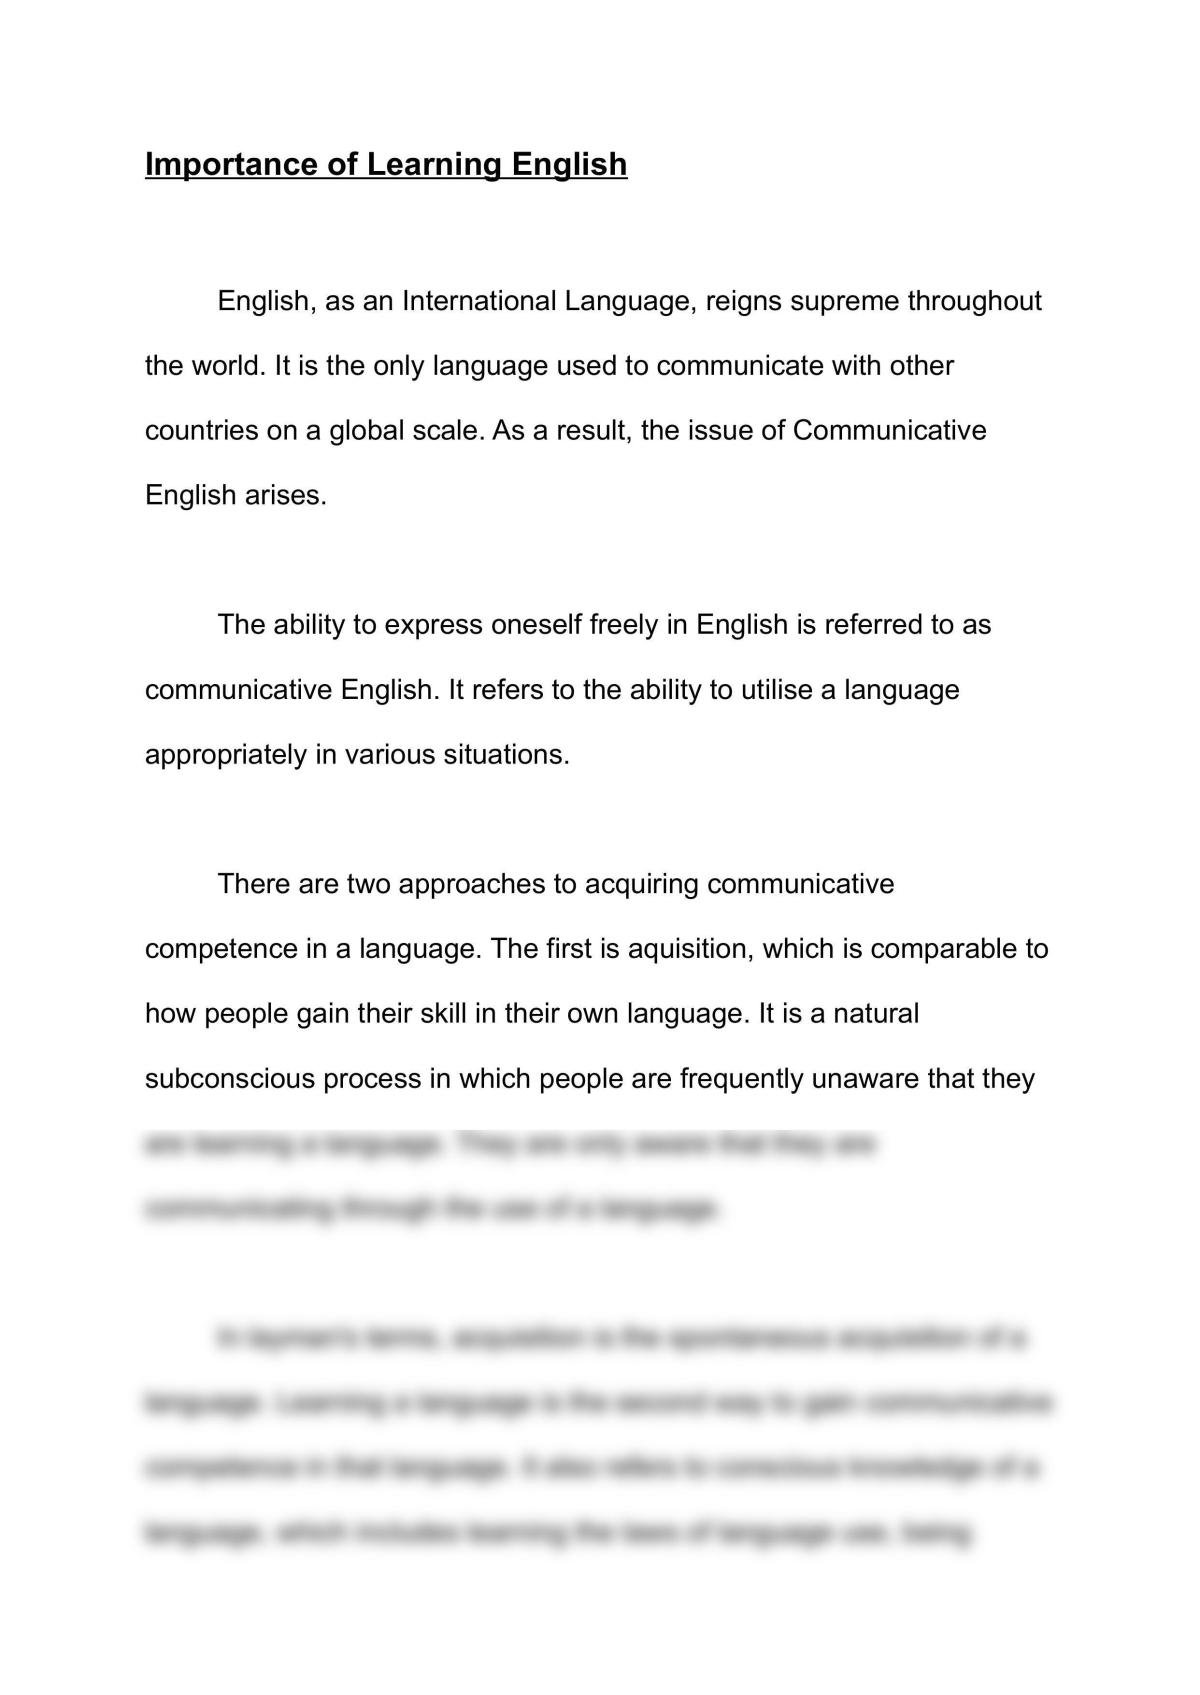 essay on advantages of learning english